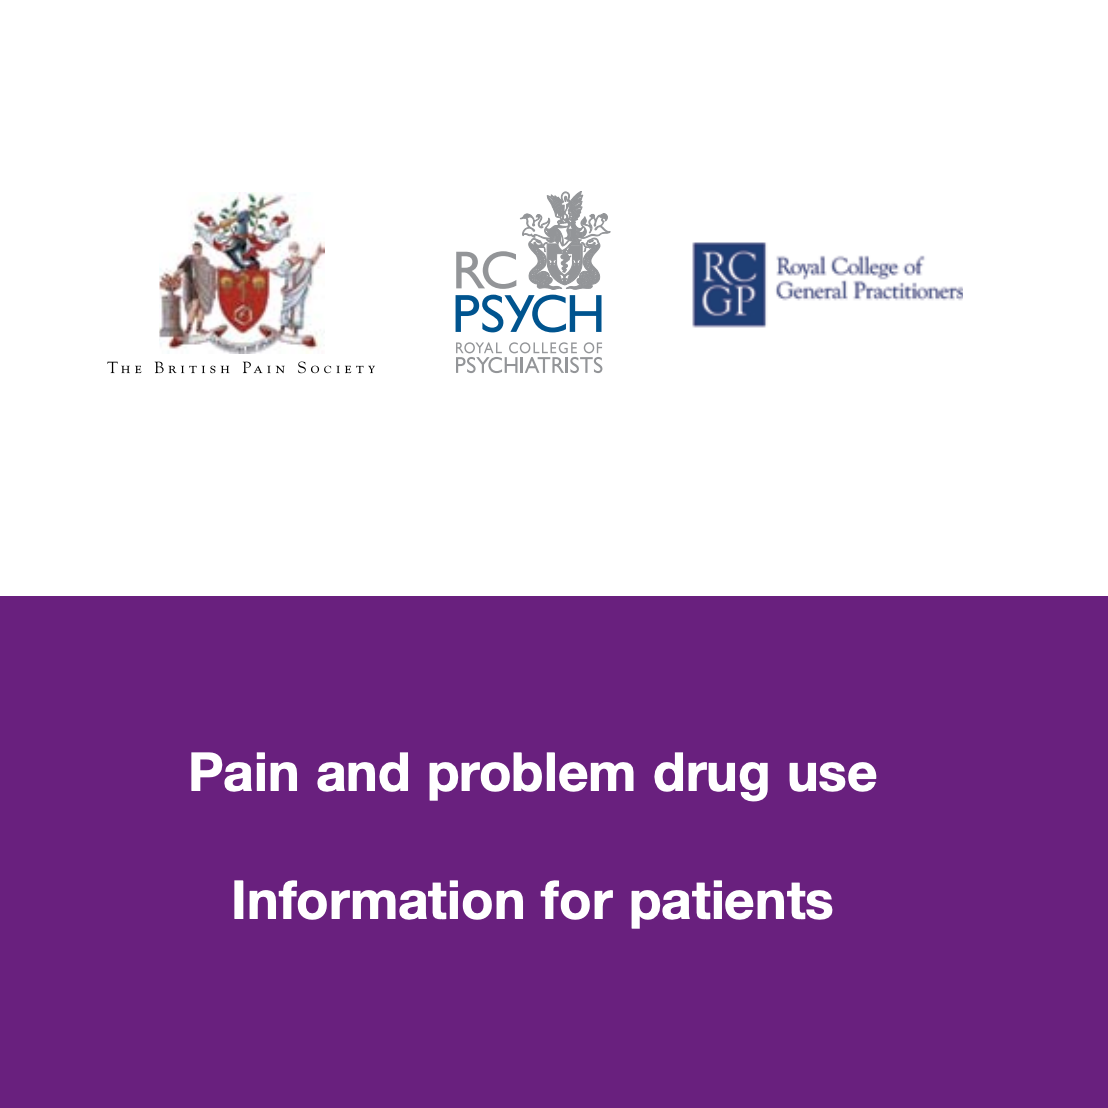 PAIN AND PROBLEM DRUG USE: INFORMATION FOR PATIENTS